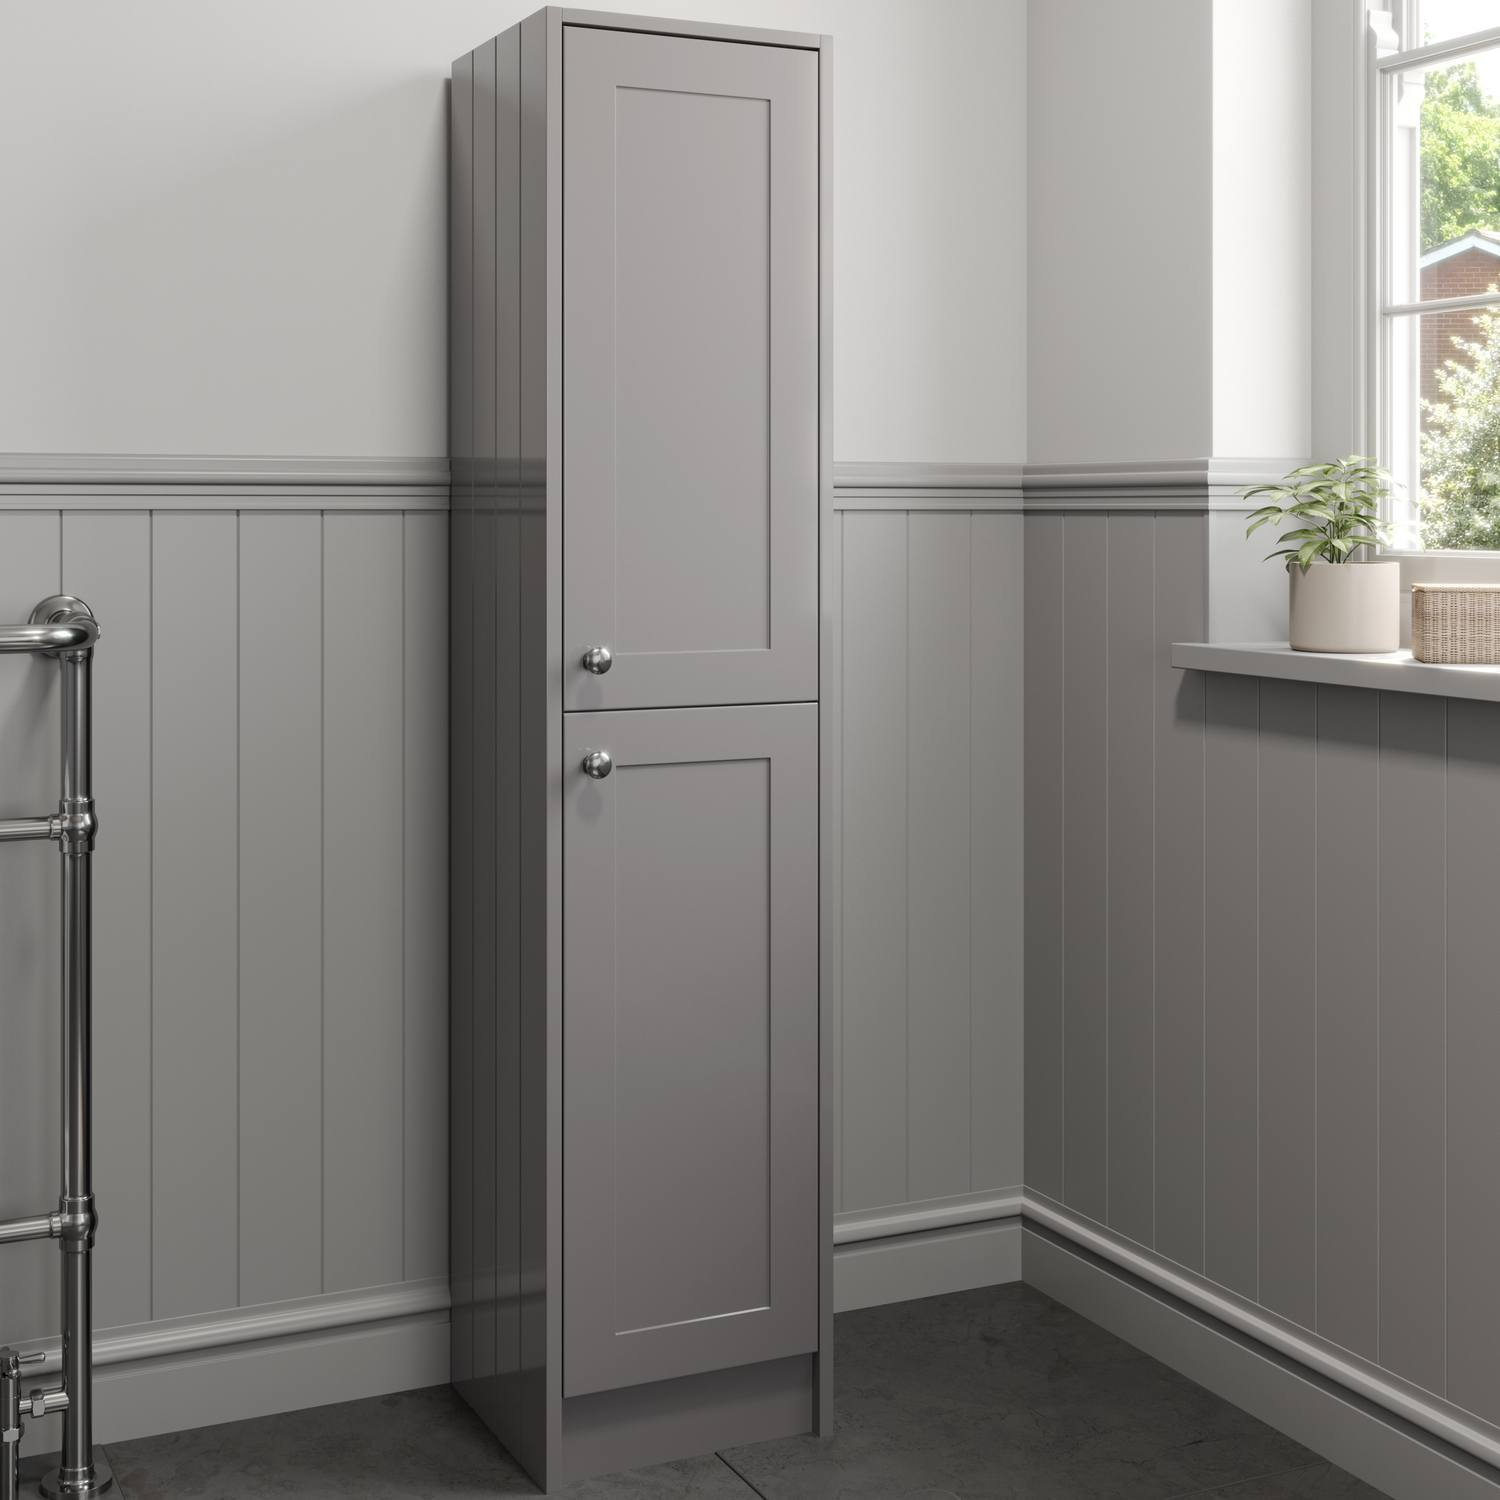 Details About 1600mm Tall Bathroom Storage Cabinet Cupboard Floorstanding Grey Traditional for size 1500 X 1500